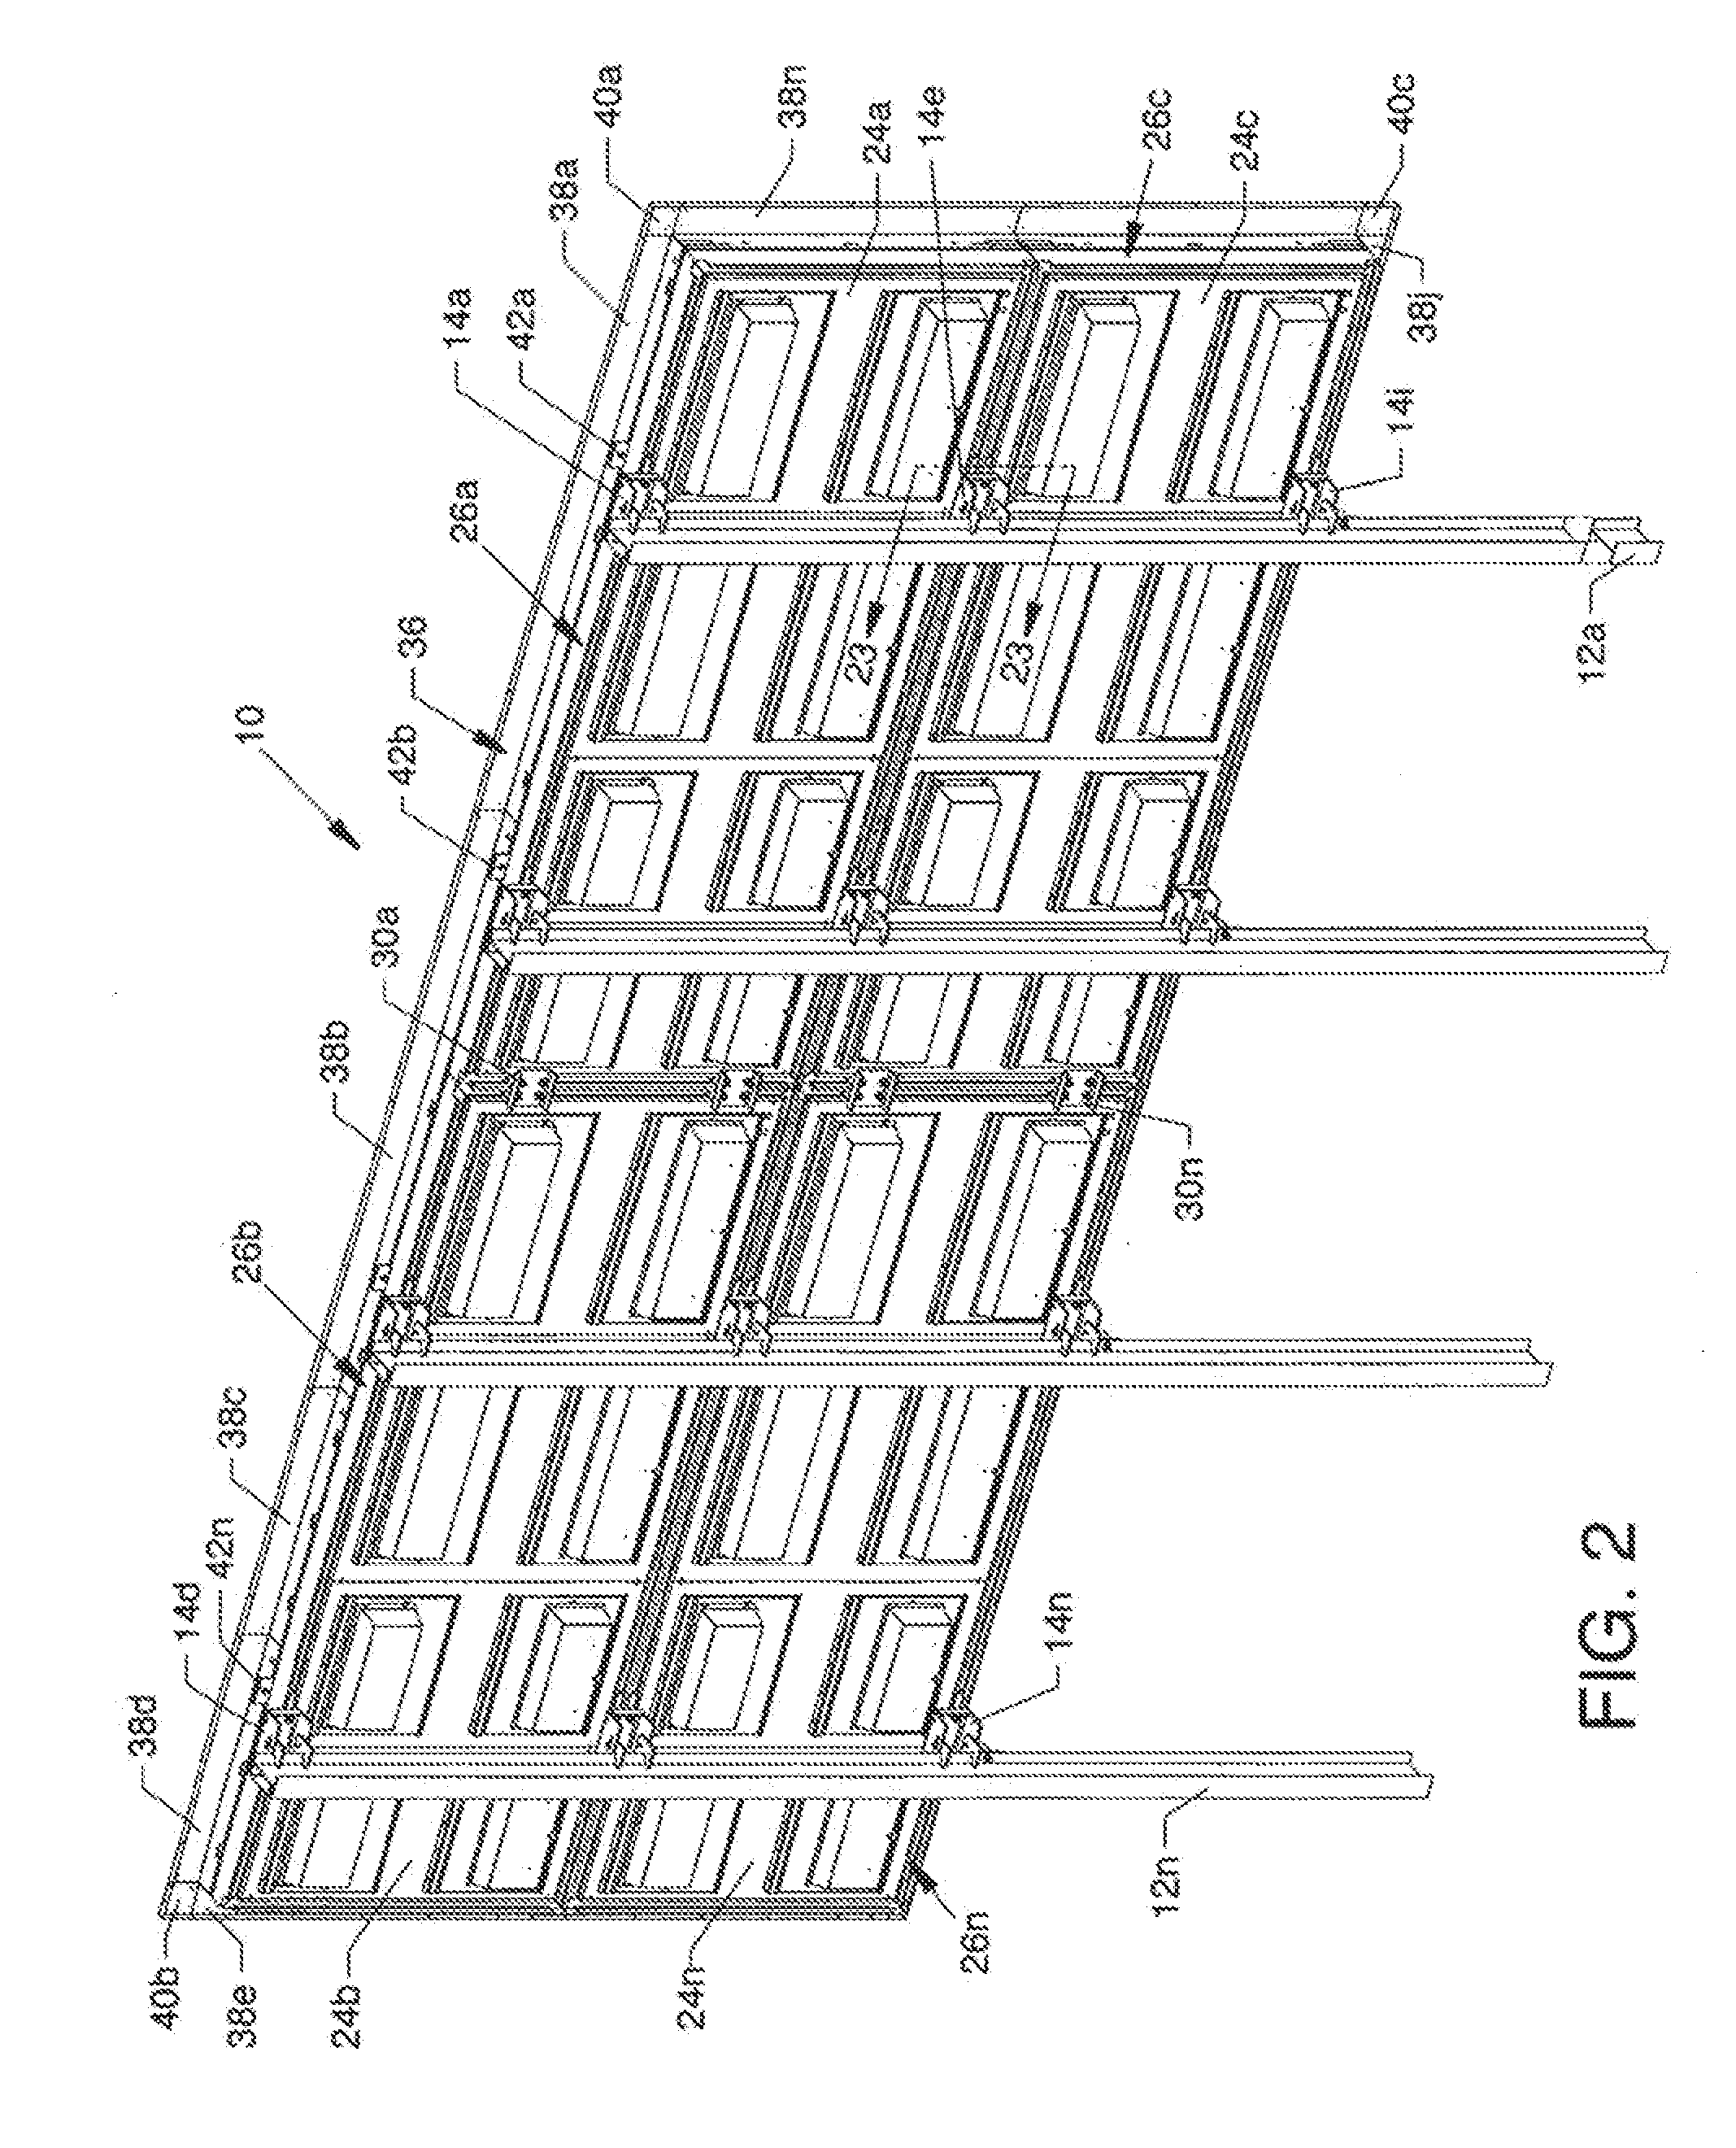 Electronic display mounting system